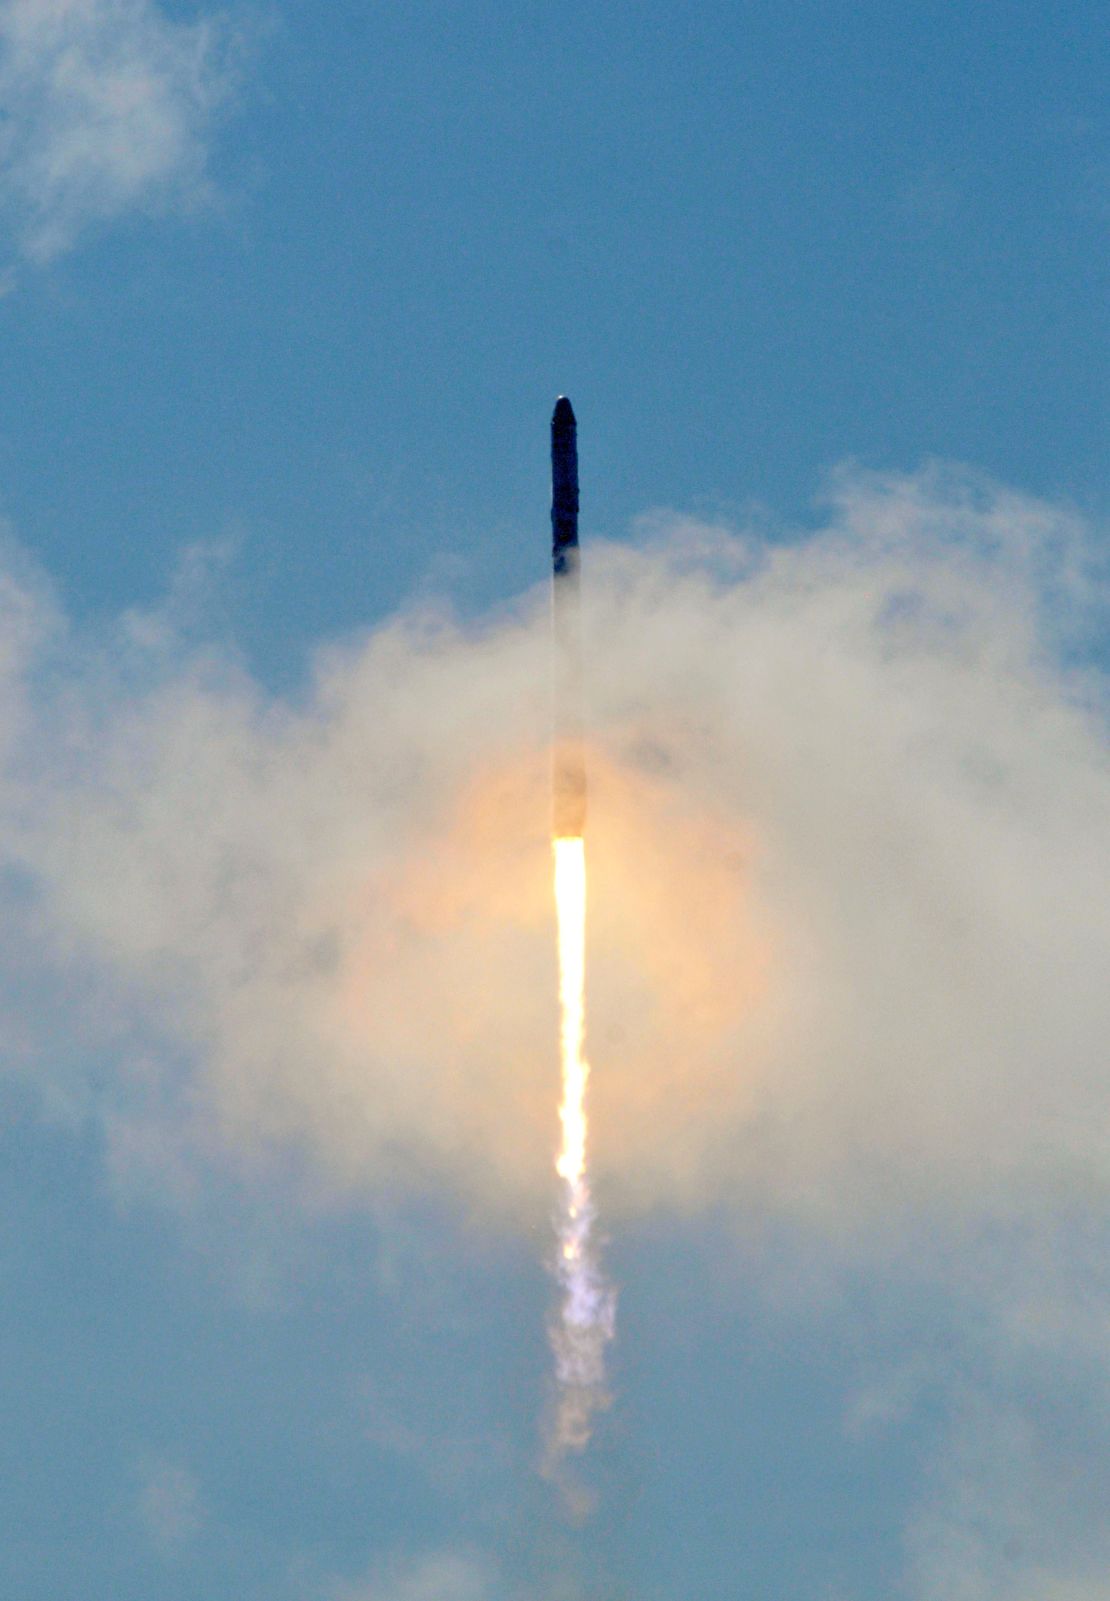 SpaceX's Falcon 9 rocket as it lifts off at Cape Canaveral, Florida on June 2015. The unmanned rocket exploded minutes later.